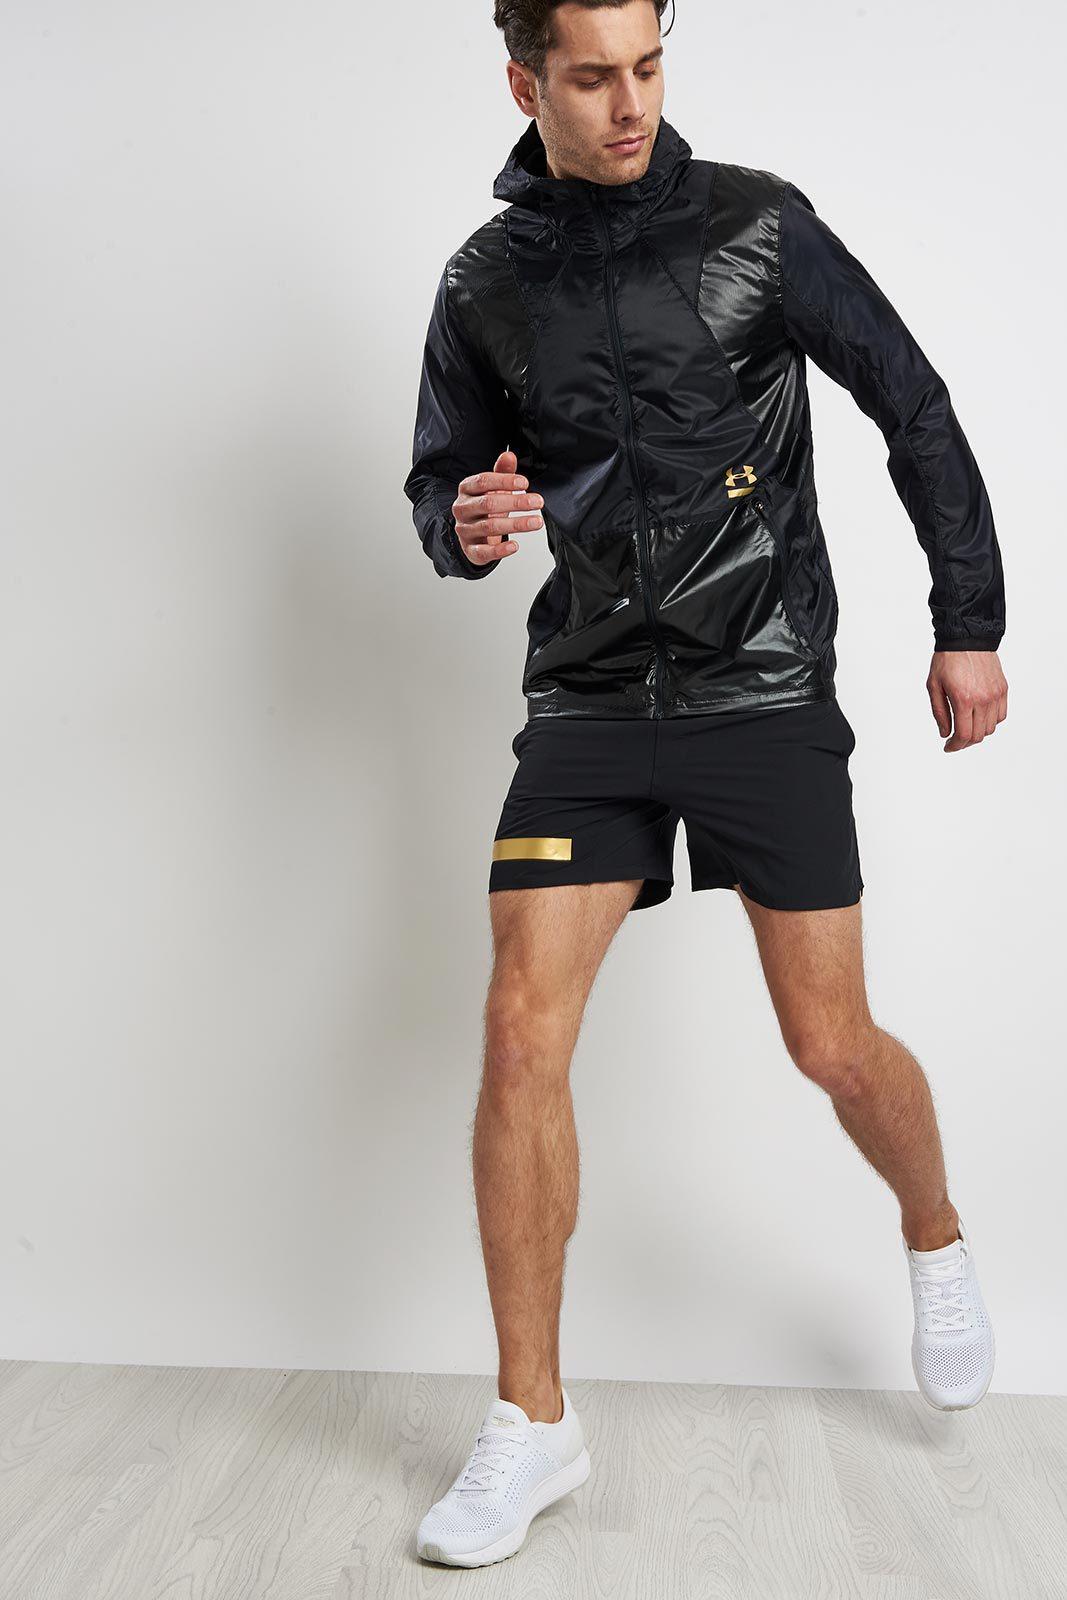 Under Armour Perpetual Full Zip Jacket Outlet Sale, UP TO 67% OFF |  www.editorialelpirata.com